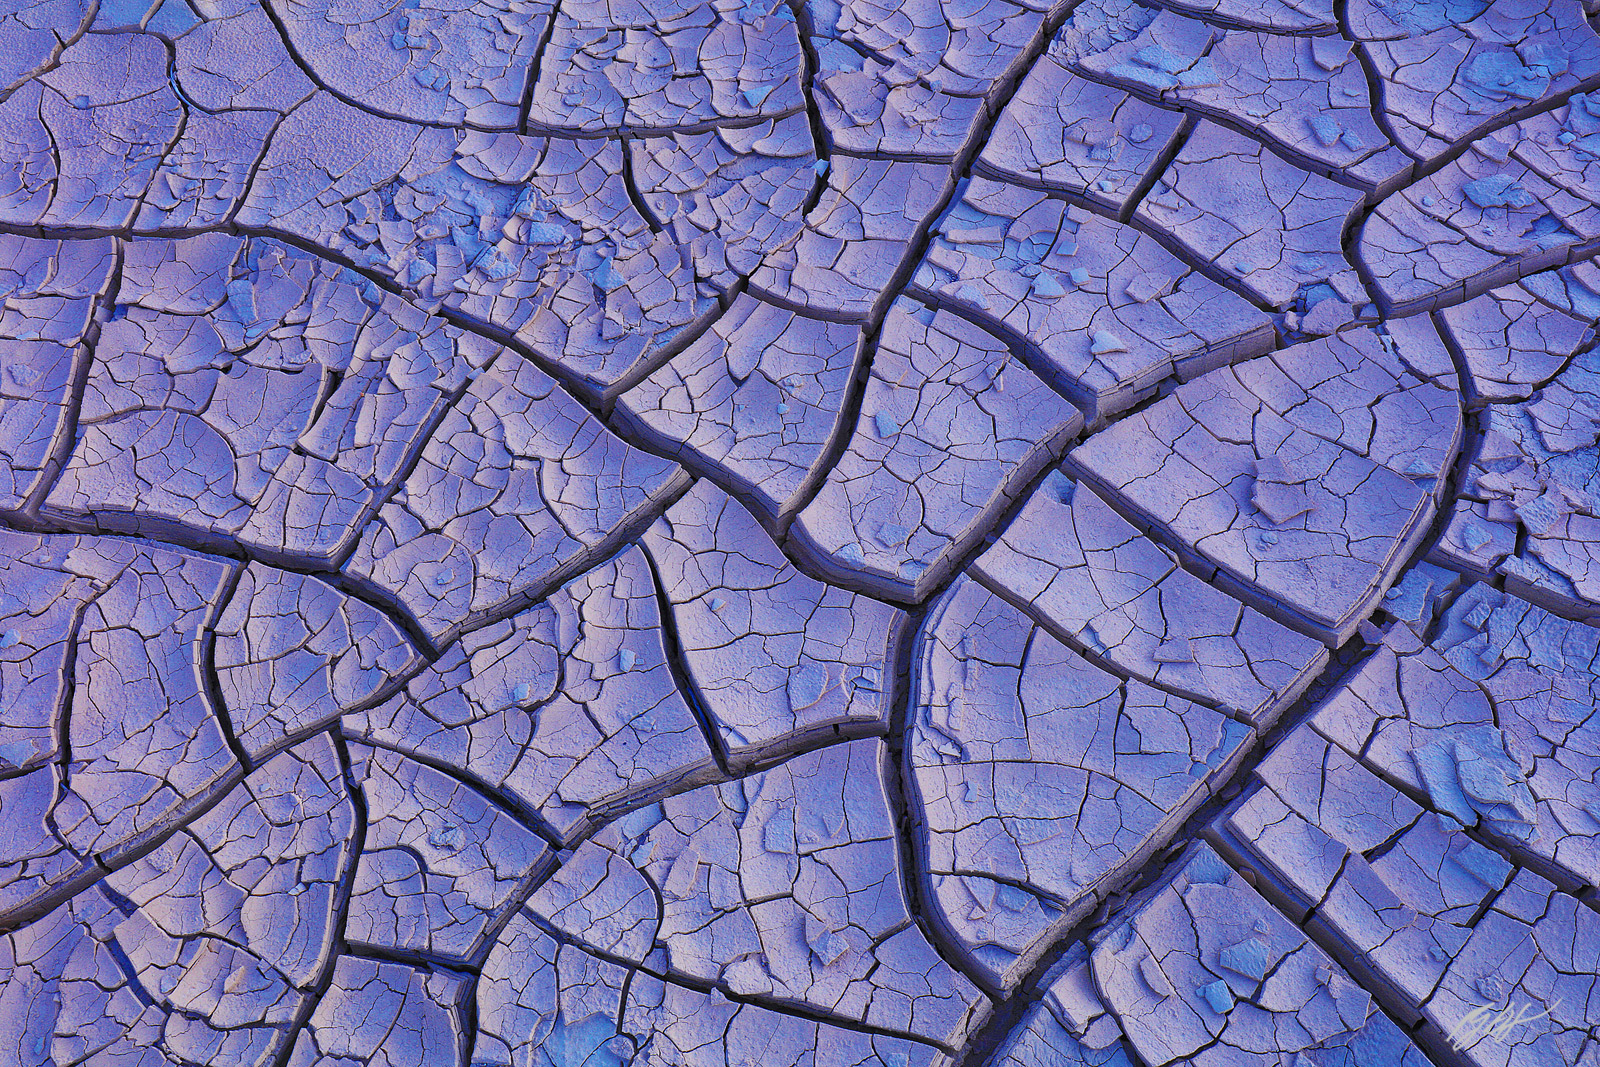 Blue Hour on the Cracked Earth Mud Tiles in Death Valley National Park in California